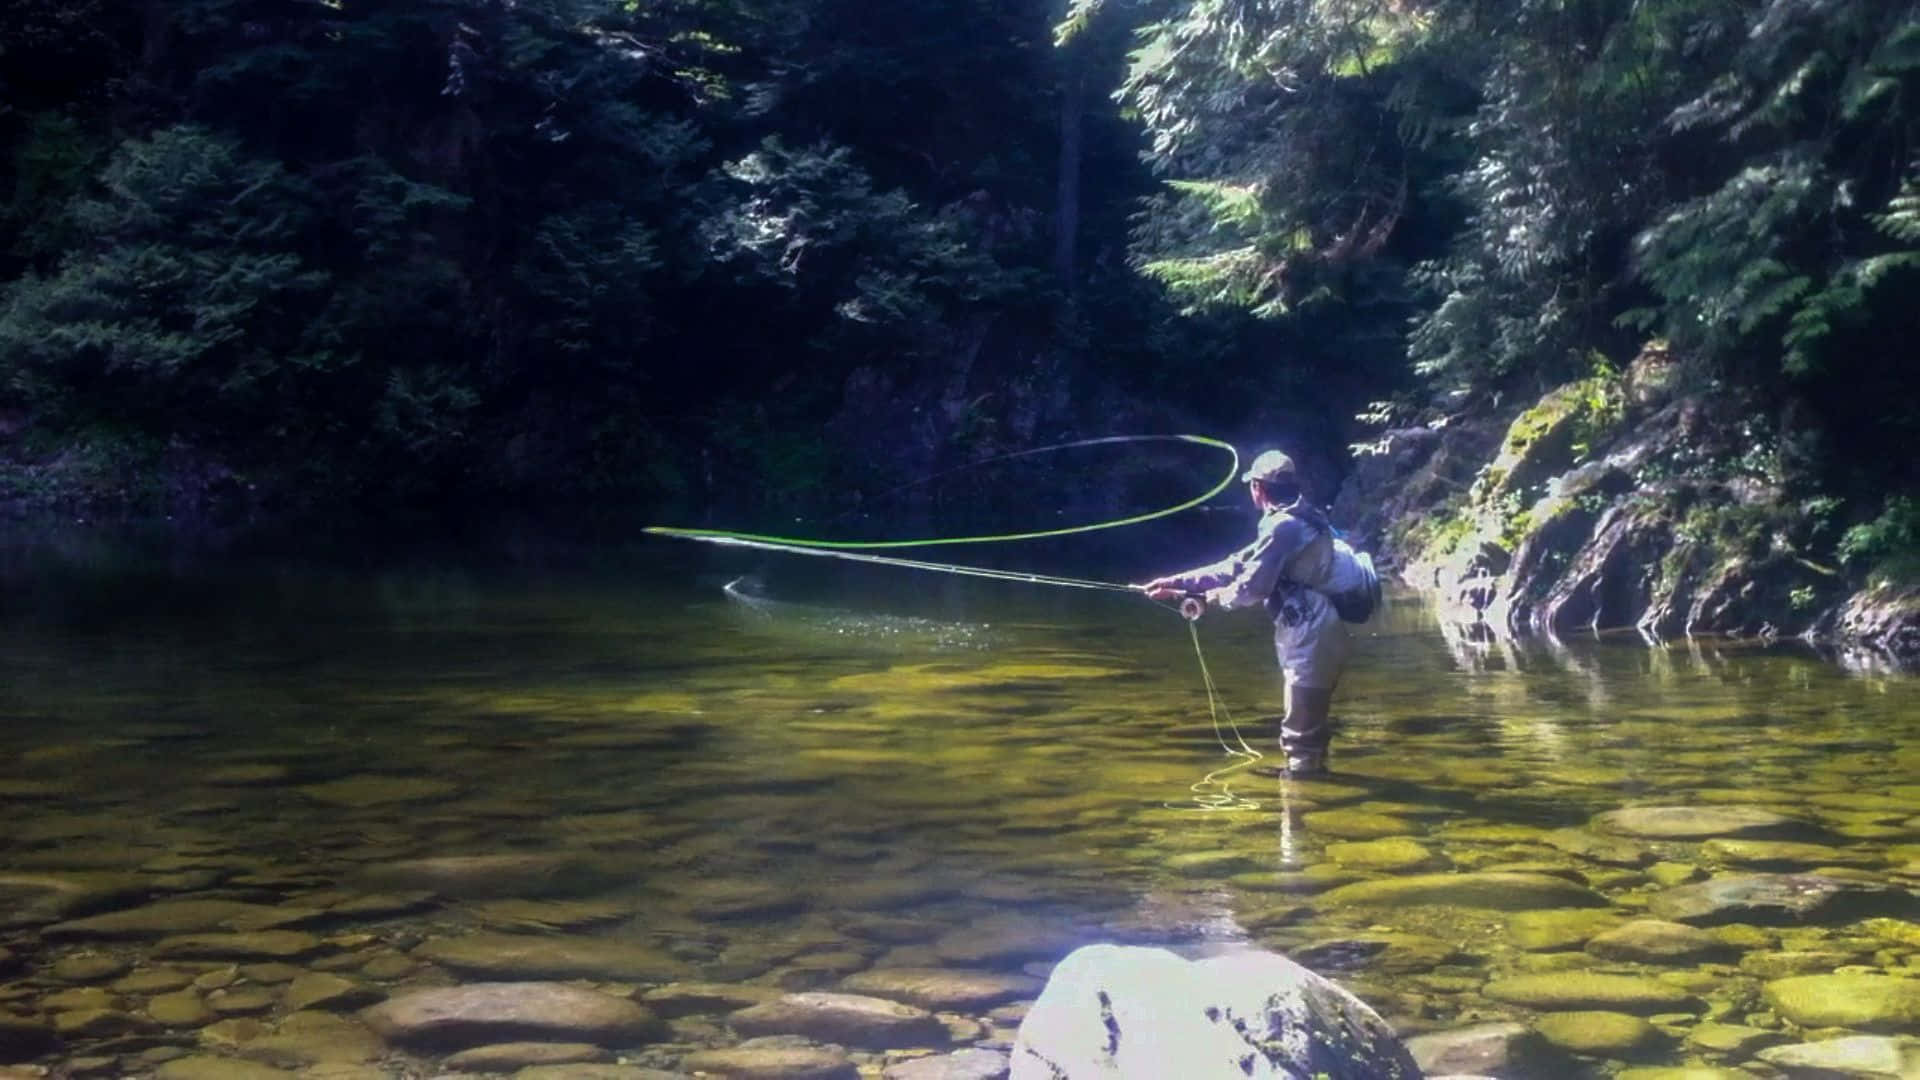 Experience the peacefulness of fly fishing through the beauty of nature Wallpaper